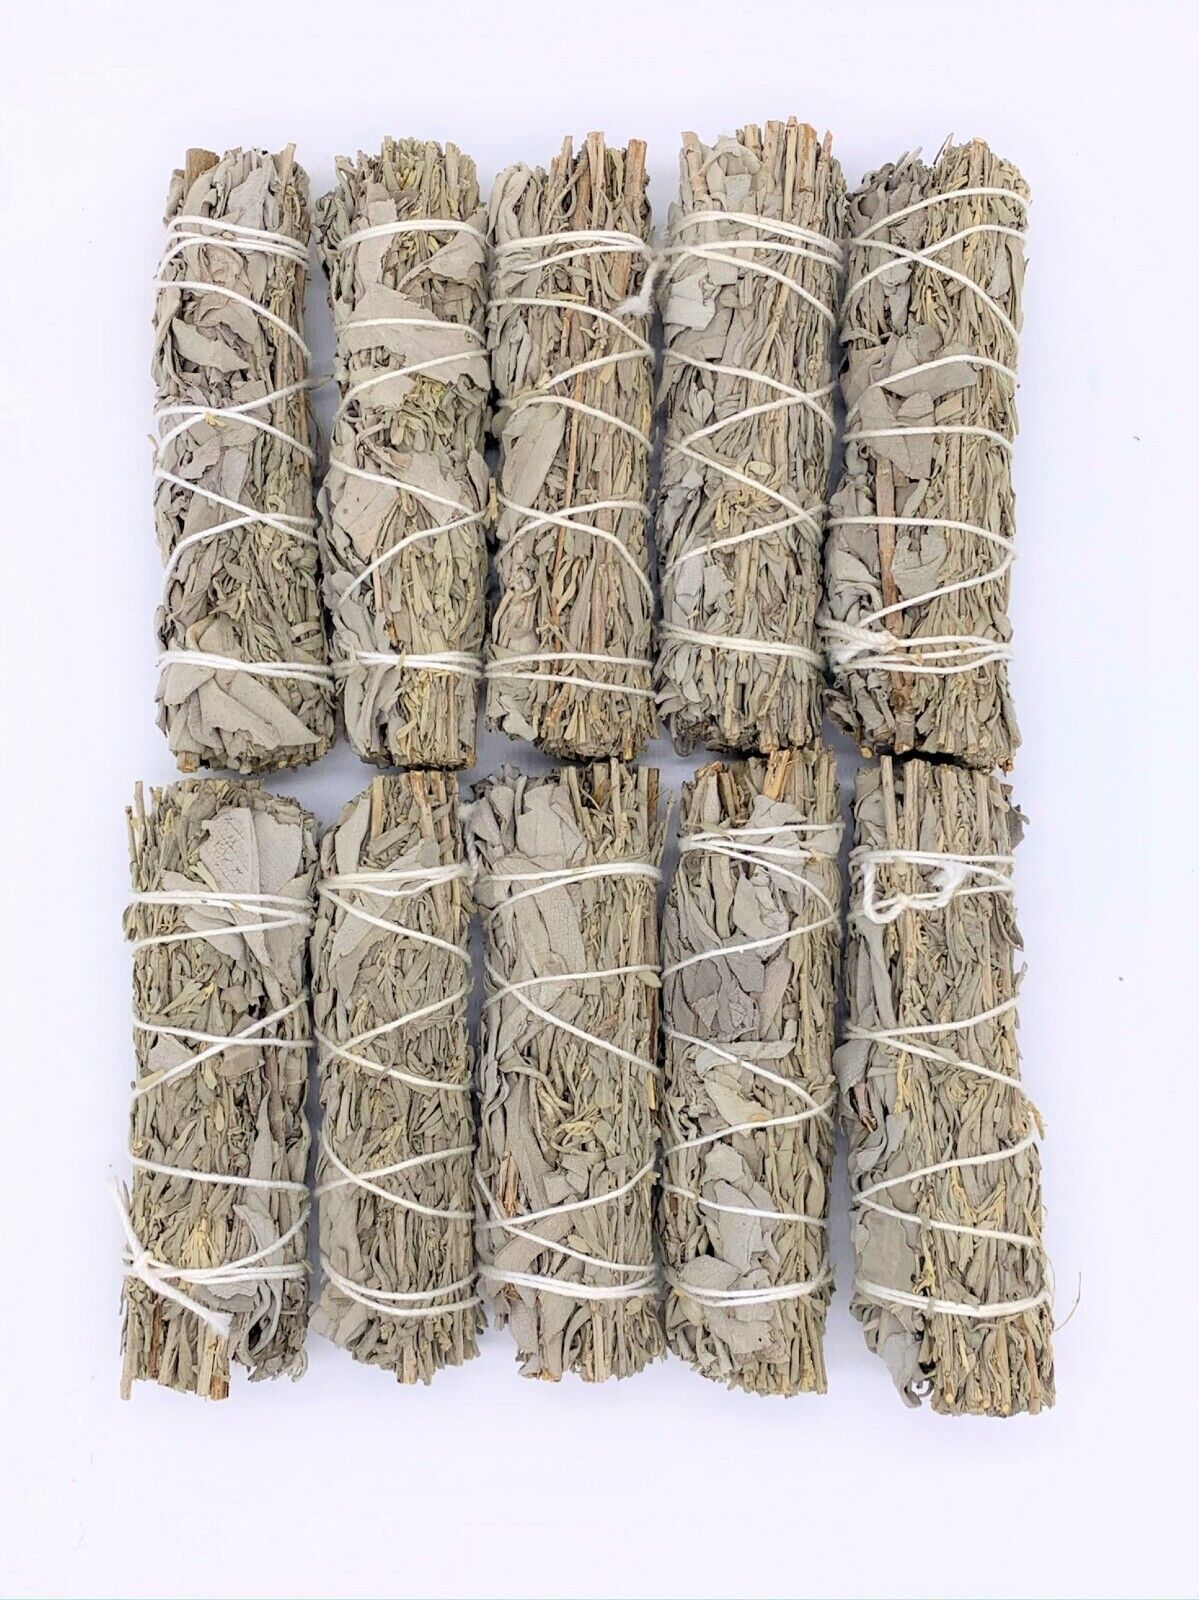 10X California White/Blue Sage Smudge Sticks 4-5 inches long -Negativity Removal